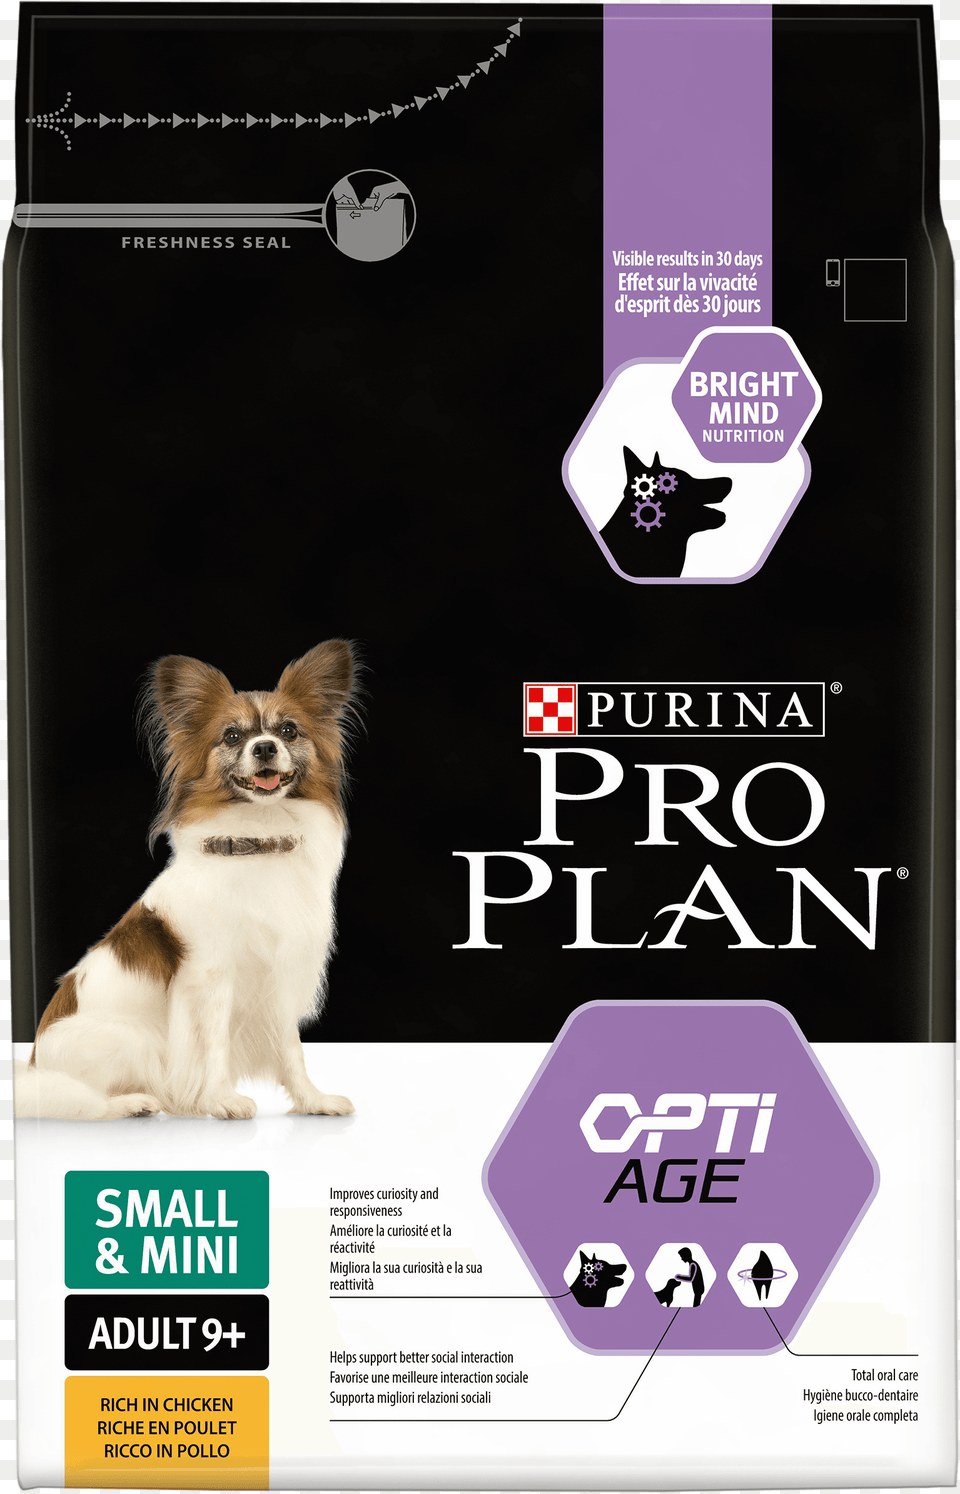 Purina Pro Plan Optiage, Advertisement, Poster, Animal, Canine Png